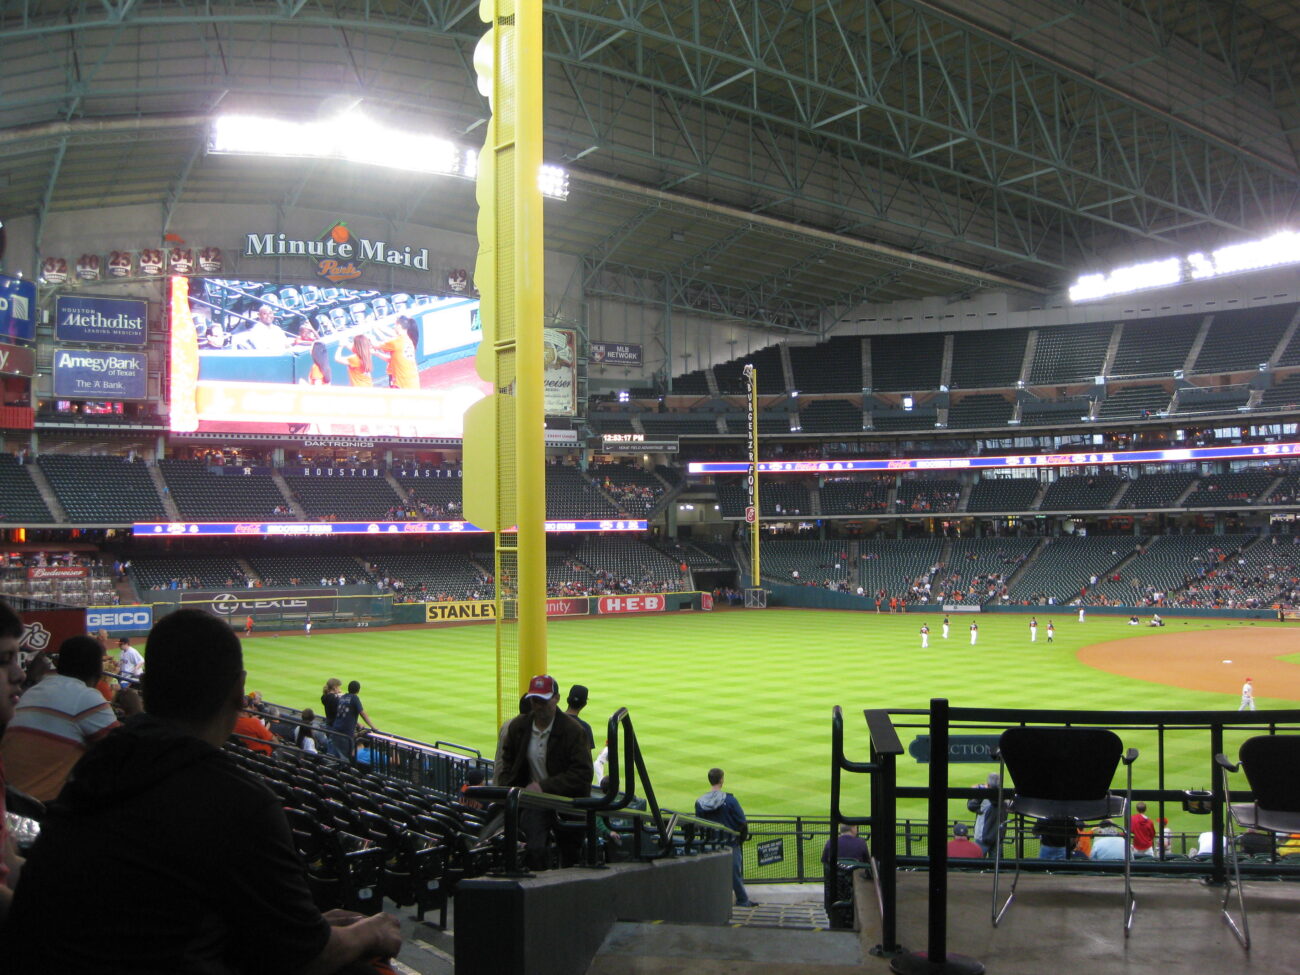 Wide angle view of Minute Maid Park showing downtown Houston